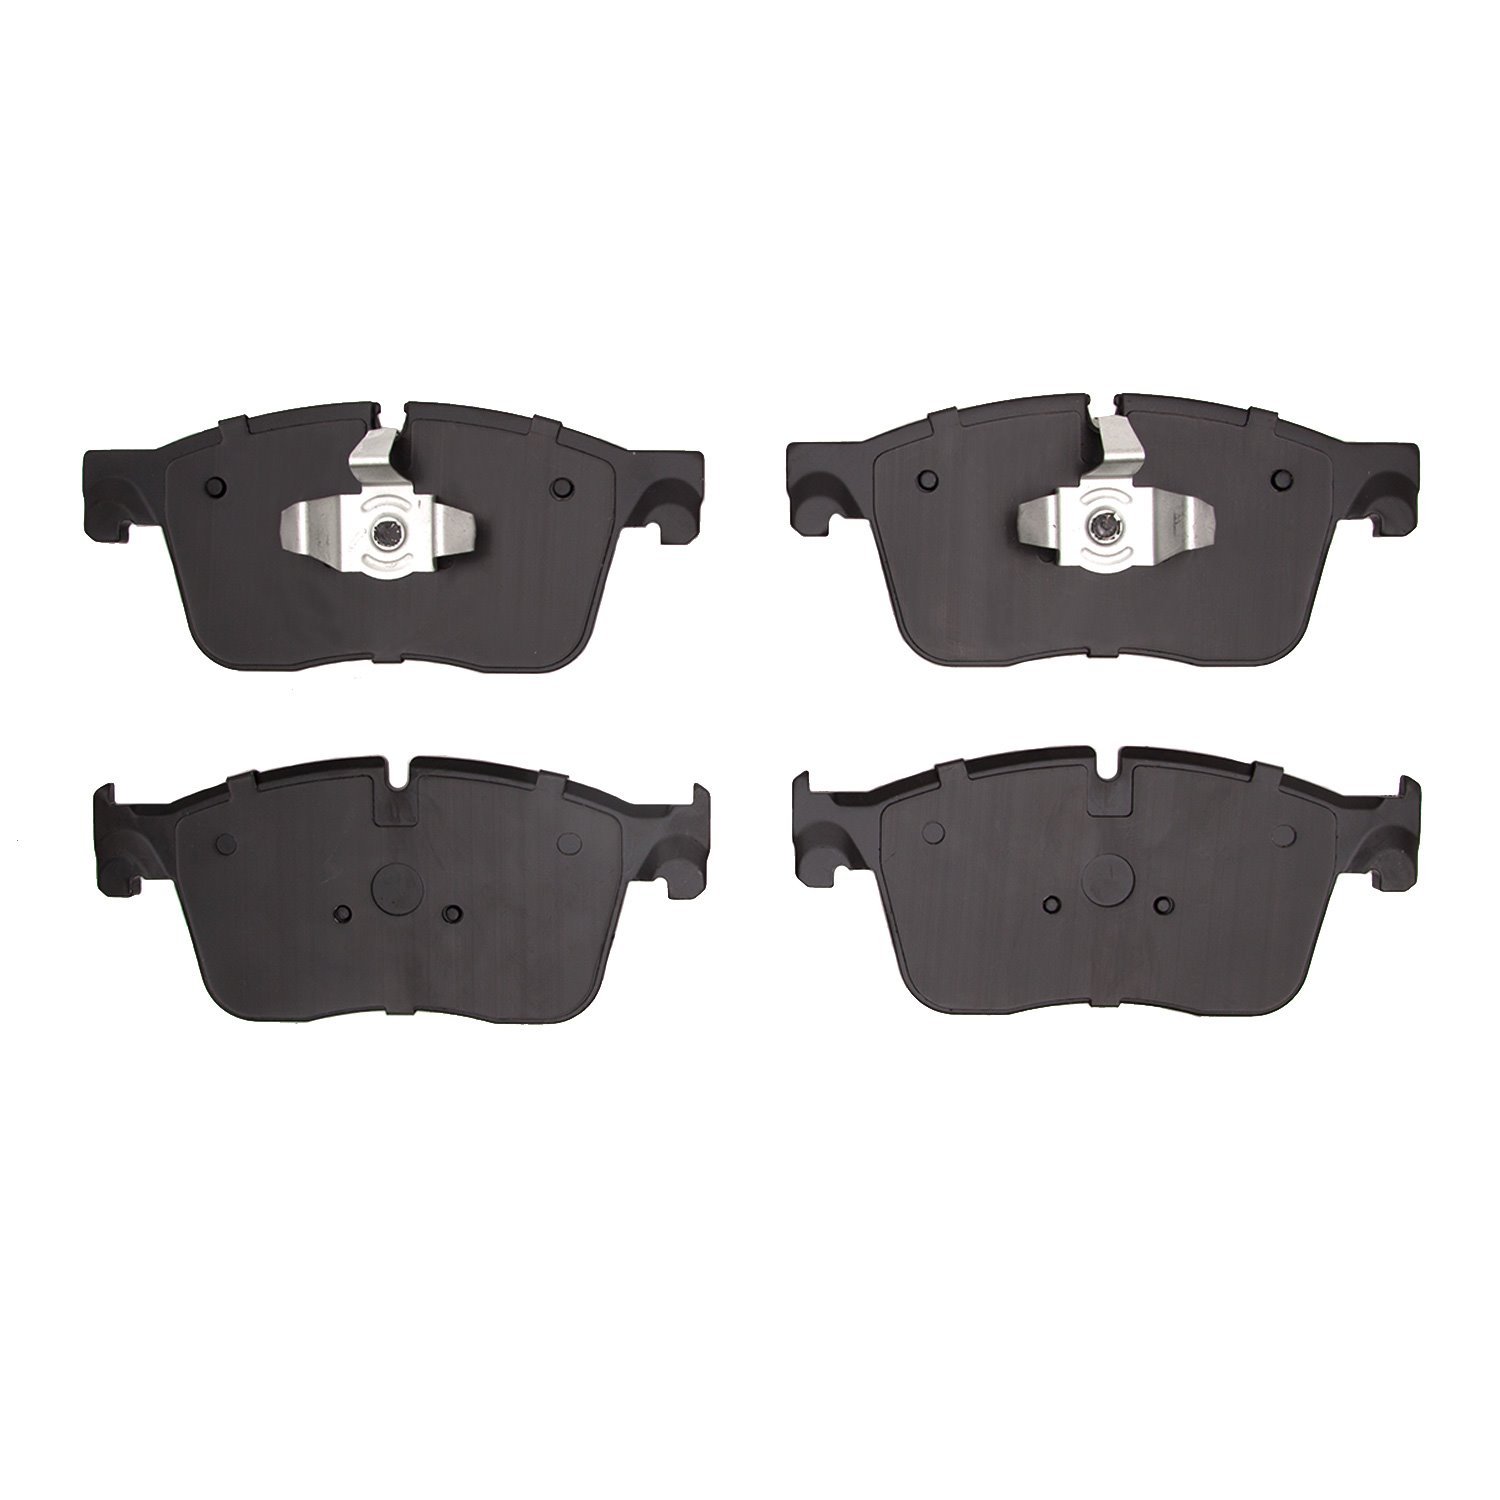 1310-1861-00 3000-Series Ceramic Brake Pads, Fits Select Multiple Makes/Models, Position: Front